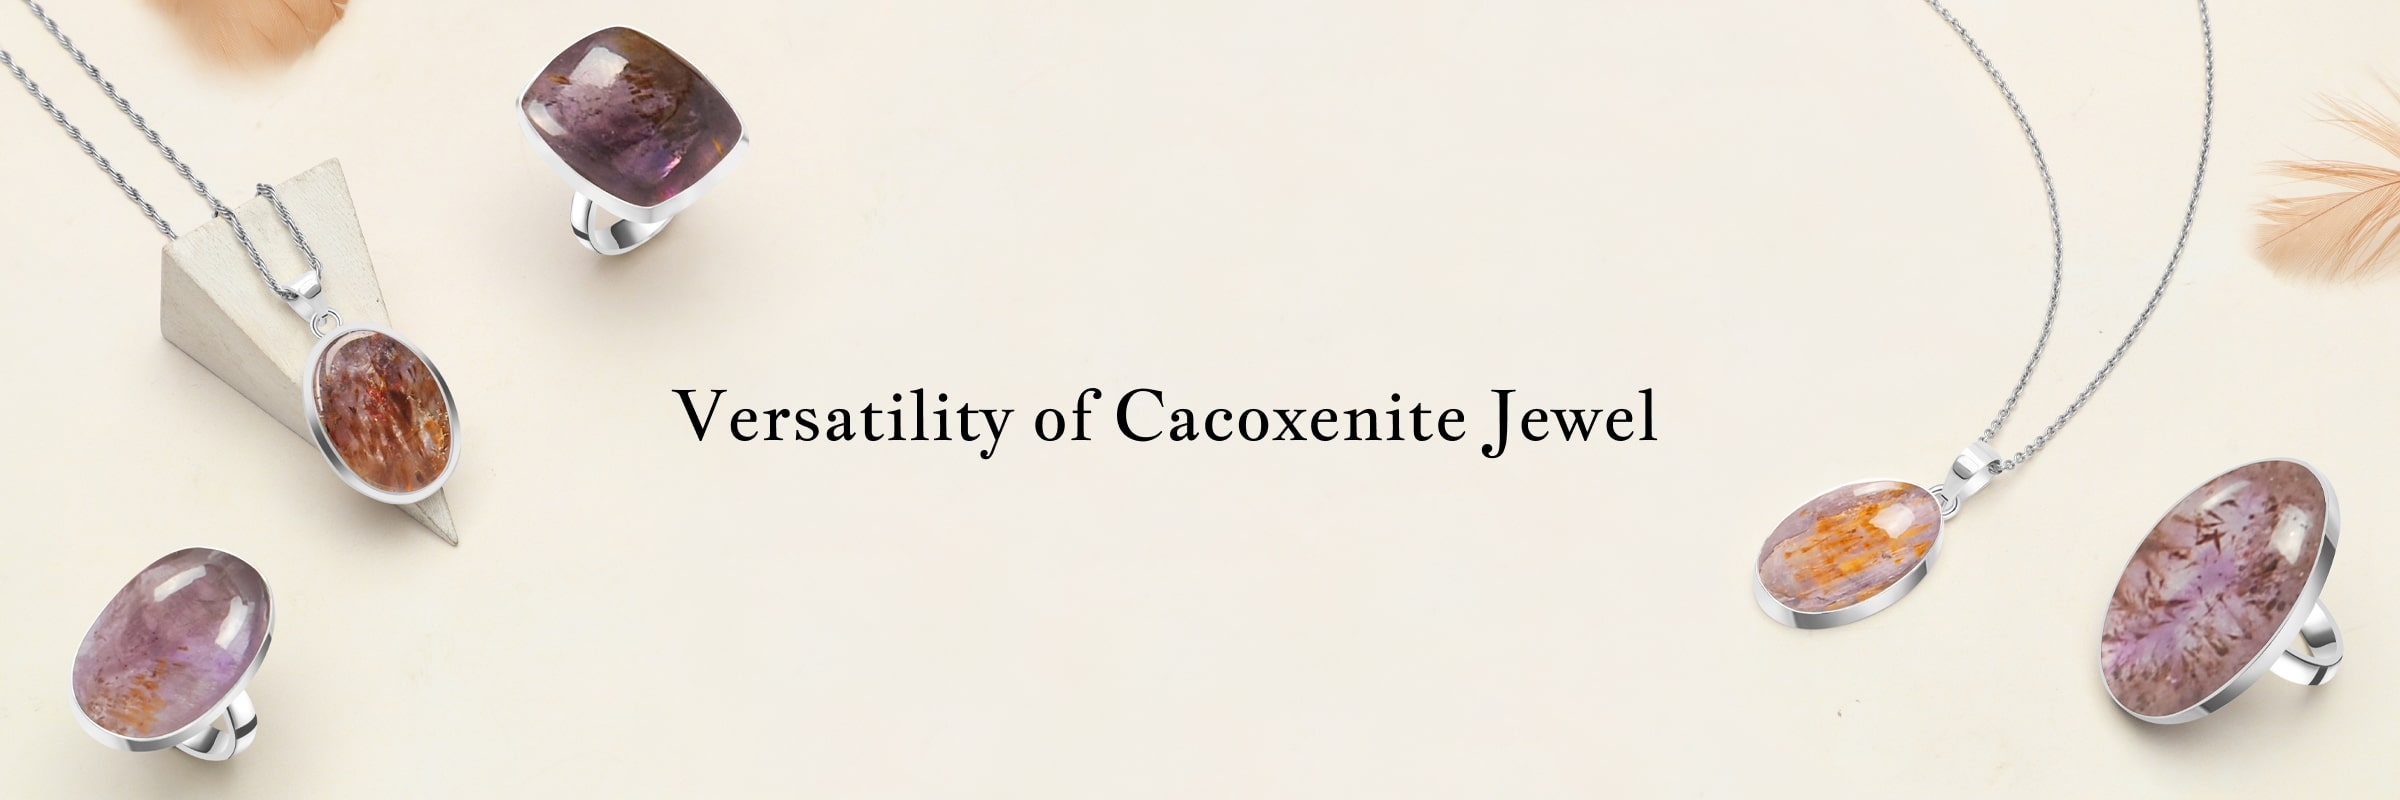 Uses of Cacoxenite Jewel